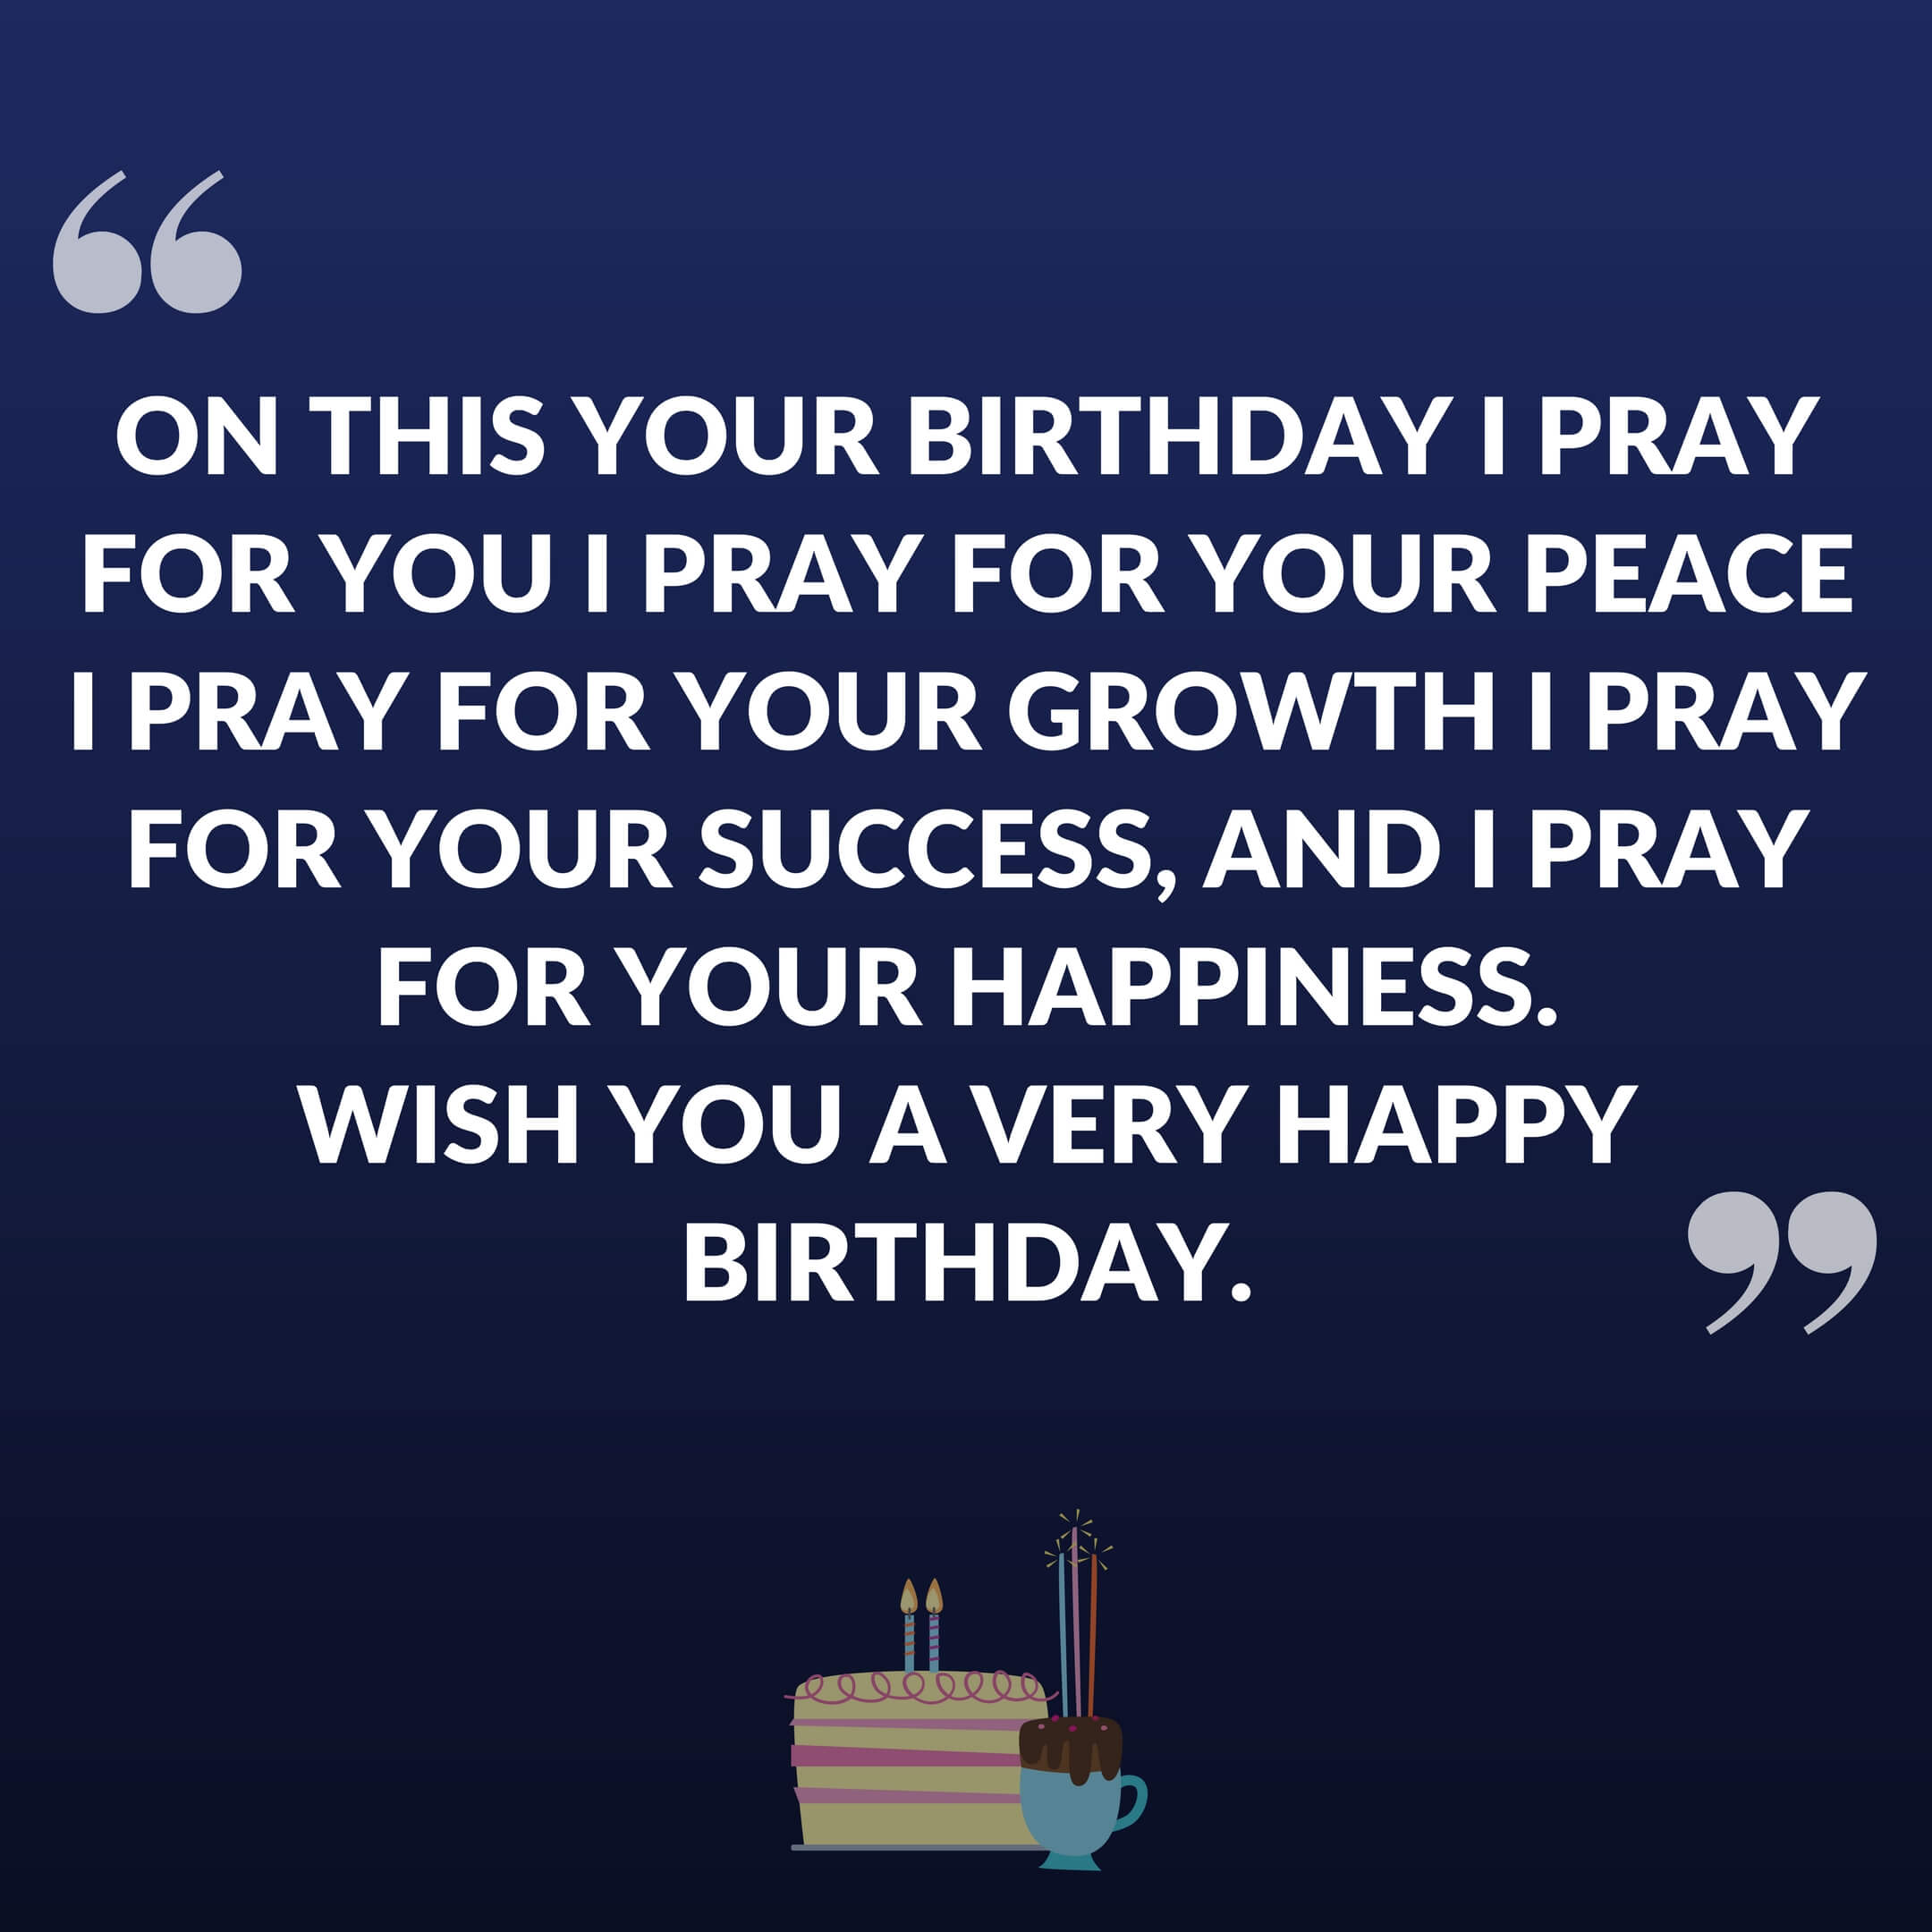 On this your birthday I pray for you I pray for your peace I pray for your growth I pray for your success, And I pray for your happiness. Wish you a very happy birthday.